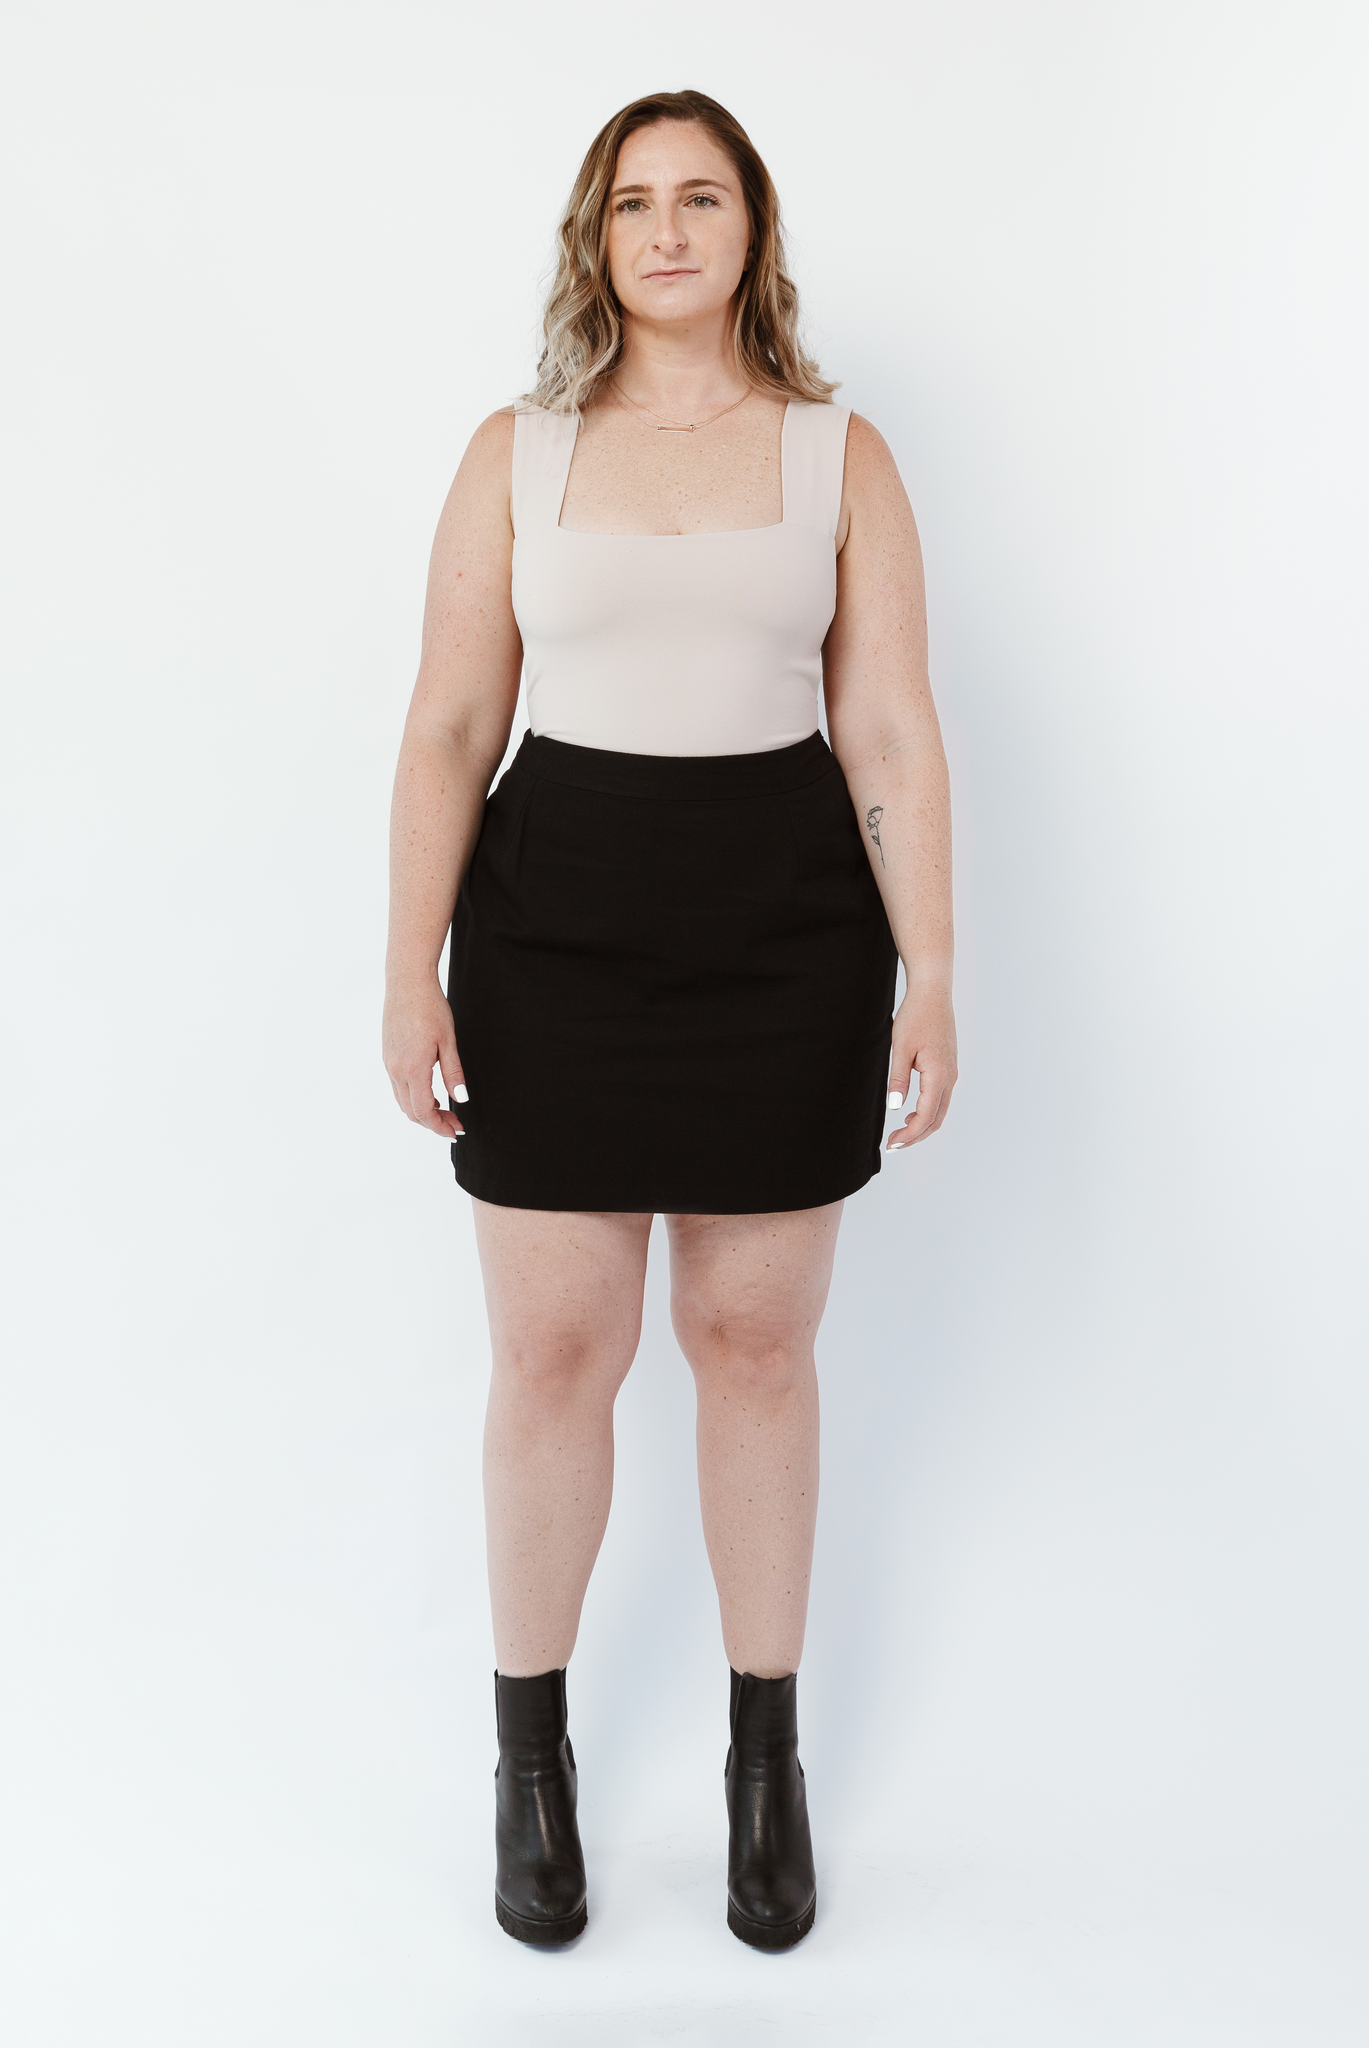 The Mini Skirt by Aam is designed for women with full hips and thighs. It's sit snug at the high waist with roomy fit through the seat for curvy bottom shapes. This image shows the front view of The Mini Skirt in black. It is shown on a model who is 5’5” and wearing a size Large. 